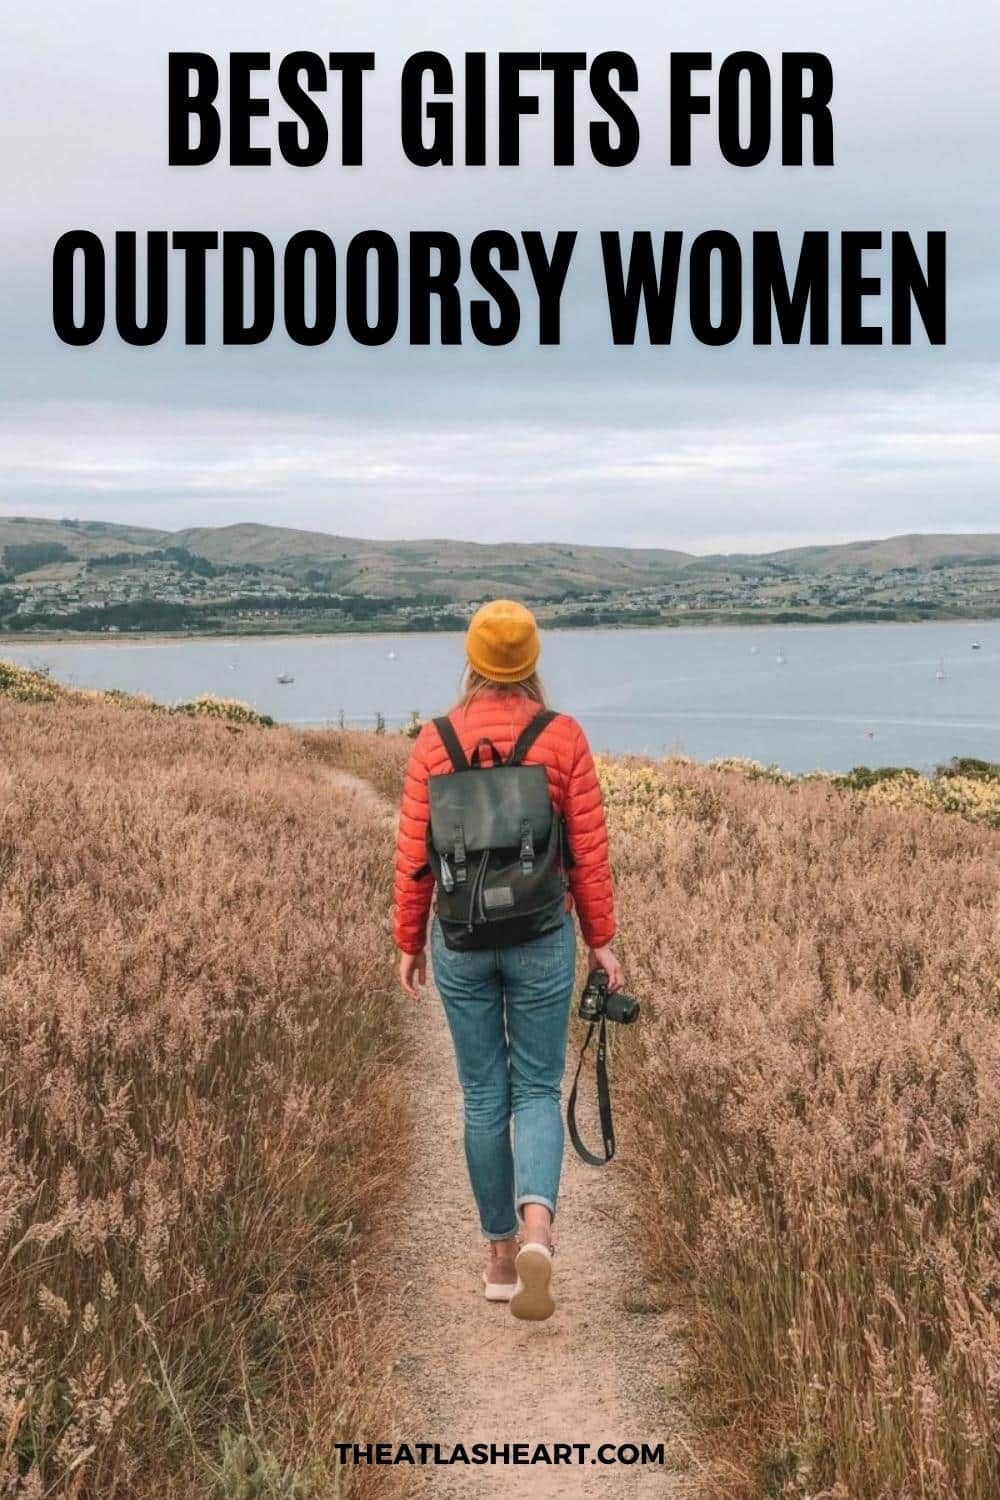 41 Best Gifts for Outdoorsy Women (That They’ll Actually Want)